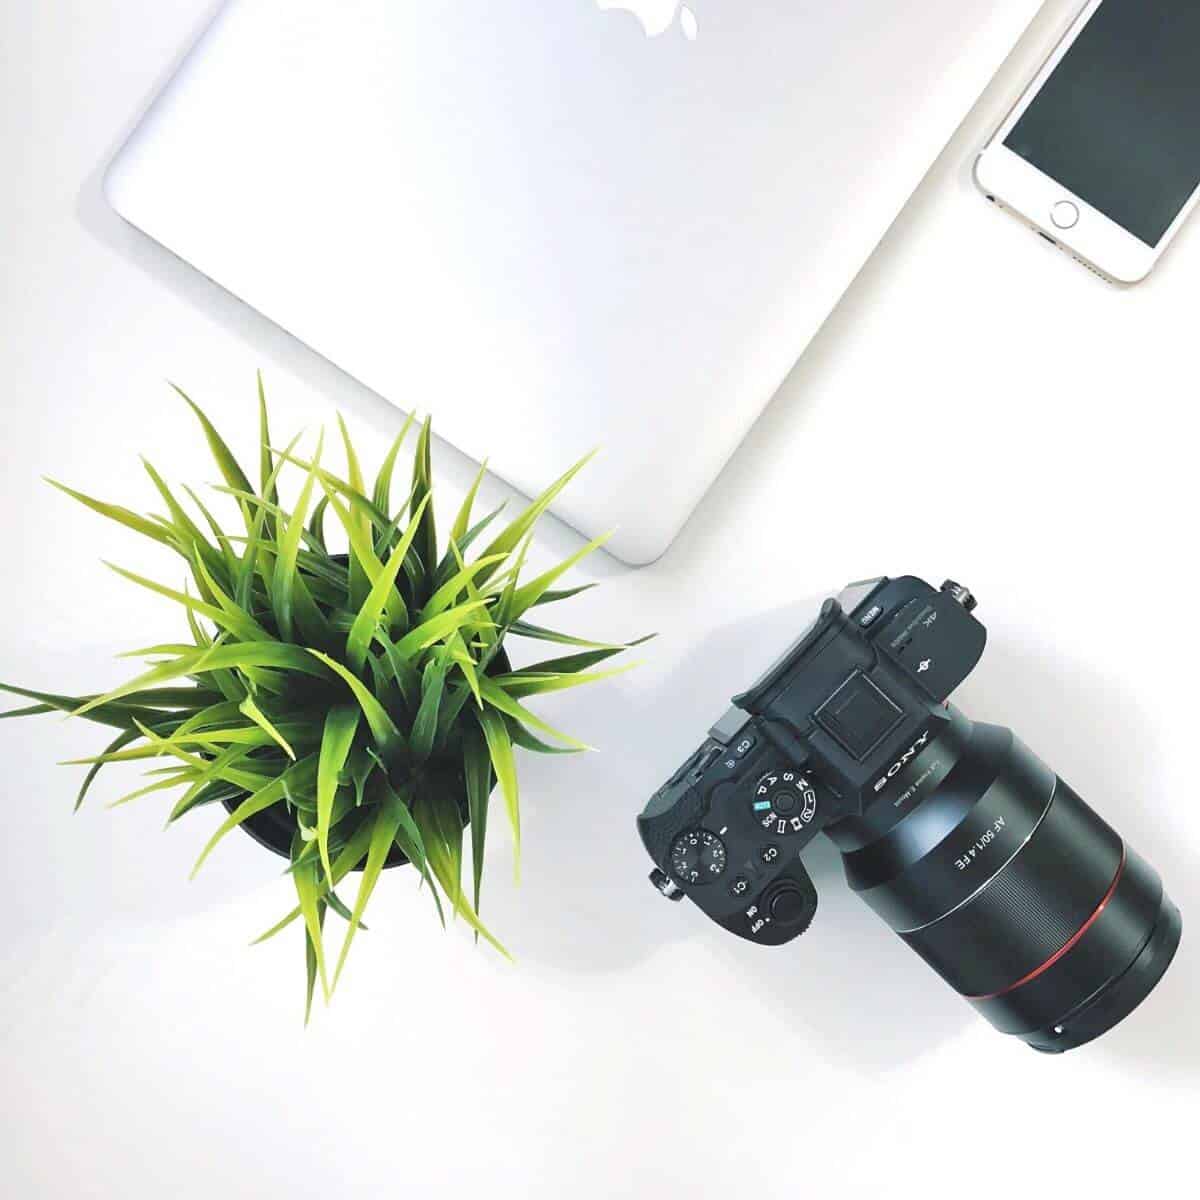 Flatlay of a camera, plant, laptop, and phone.